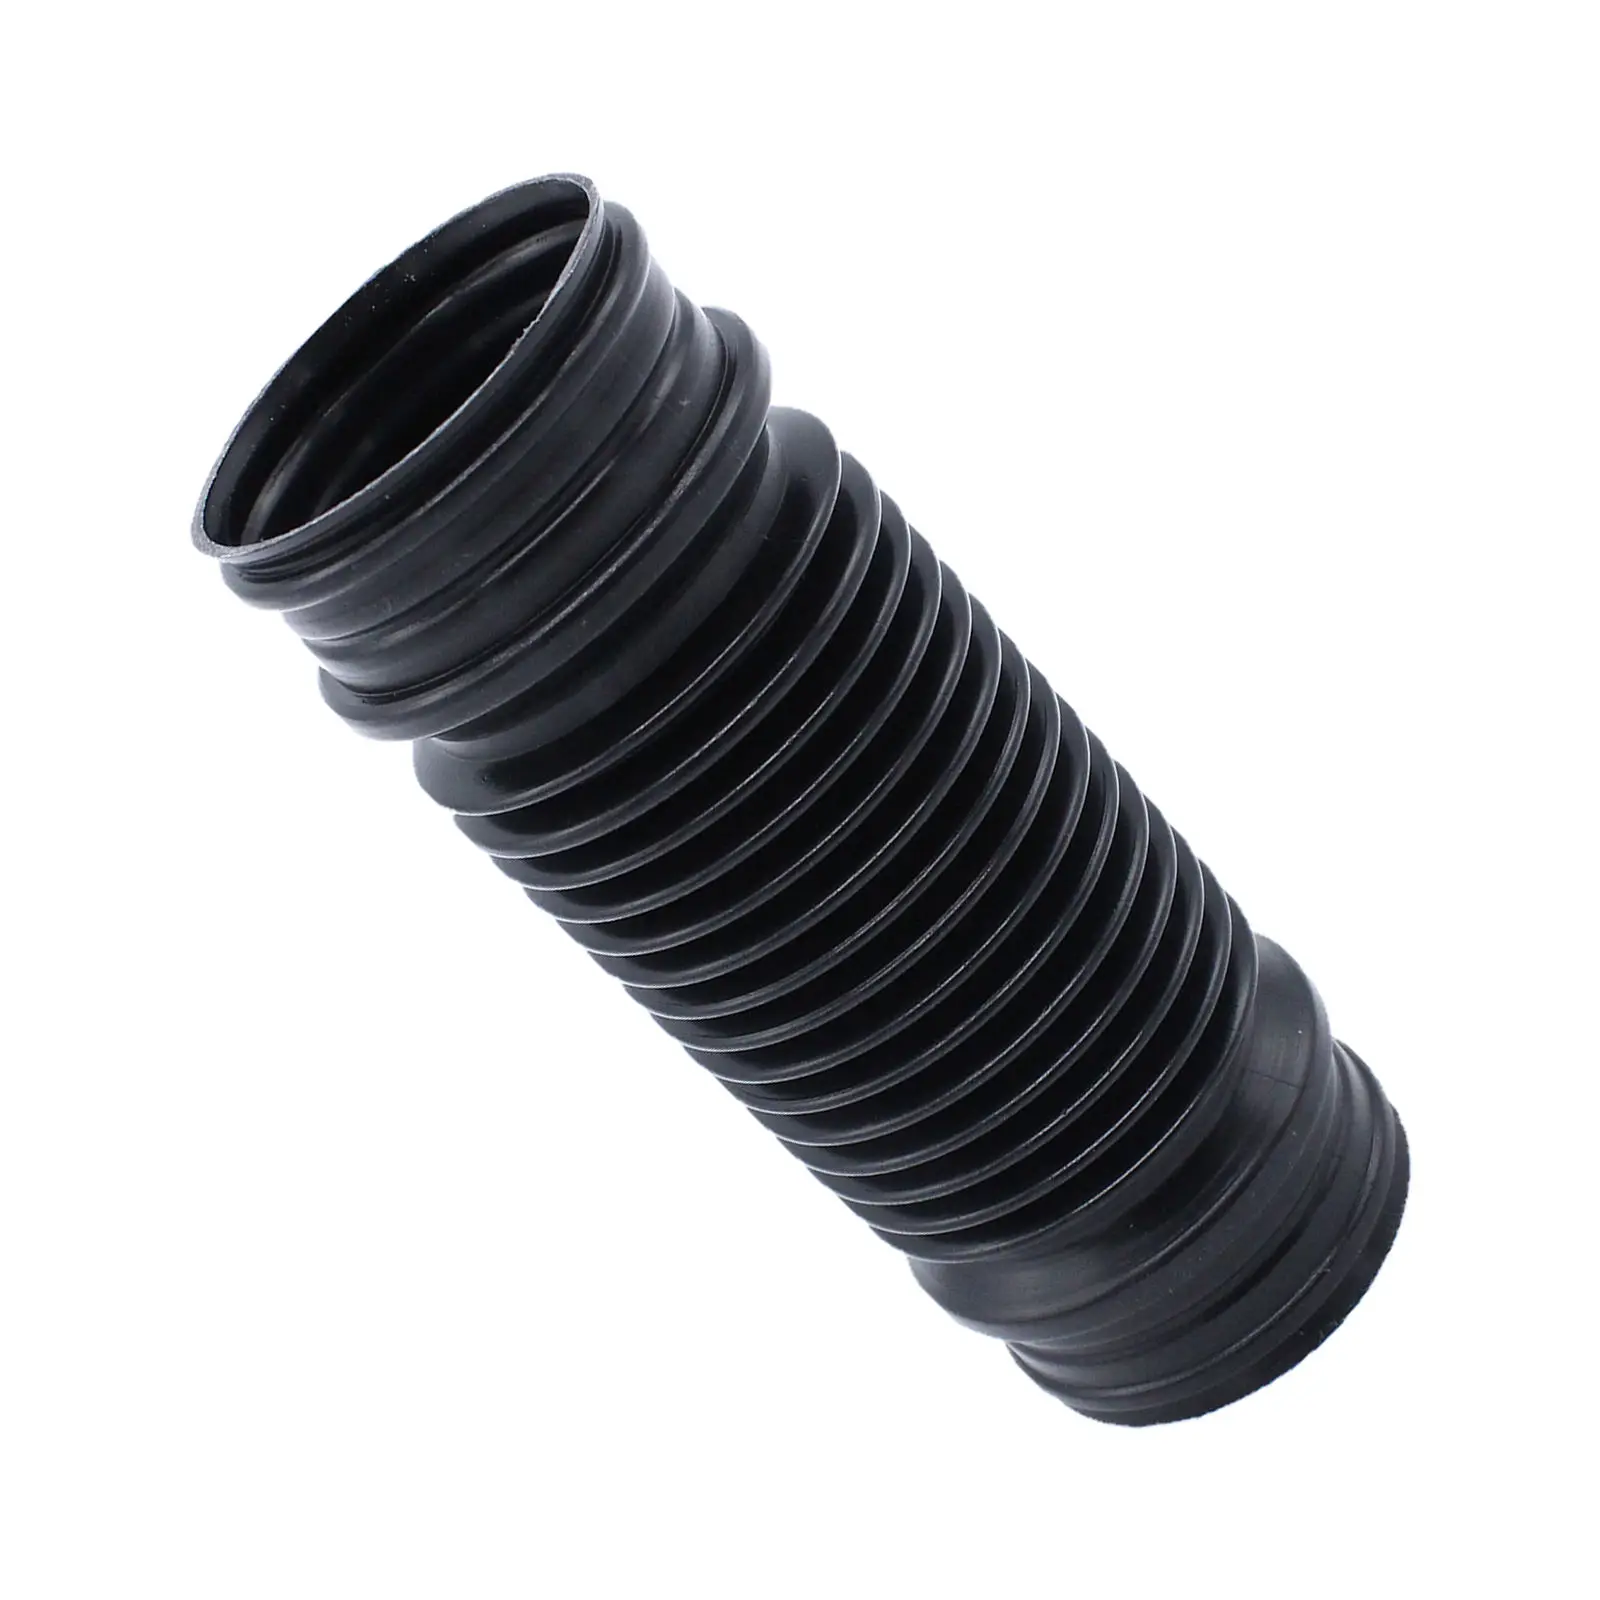 Intake Control Air Hose Pipe 1J0129618B Fit for VW Bora 99-05 Air Intake Tube Cleaner Hose Replacement Parts Acc